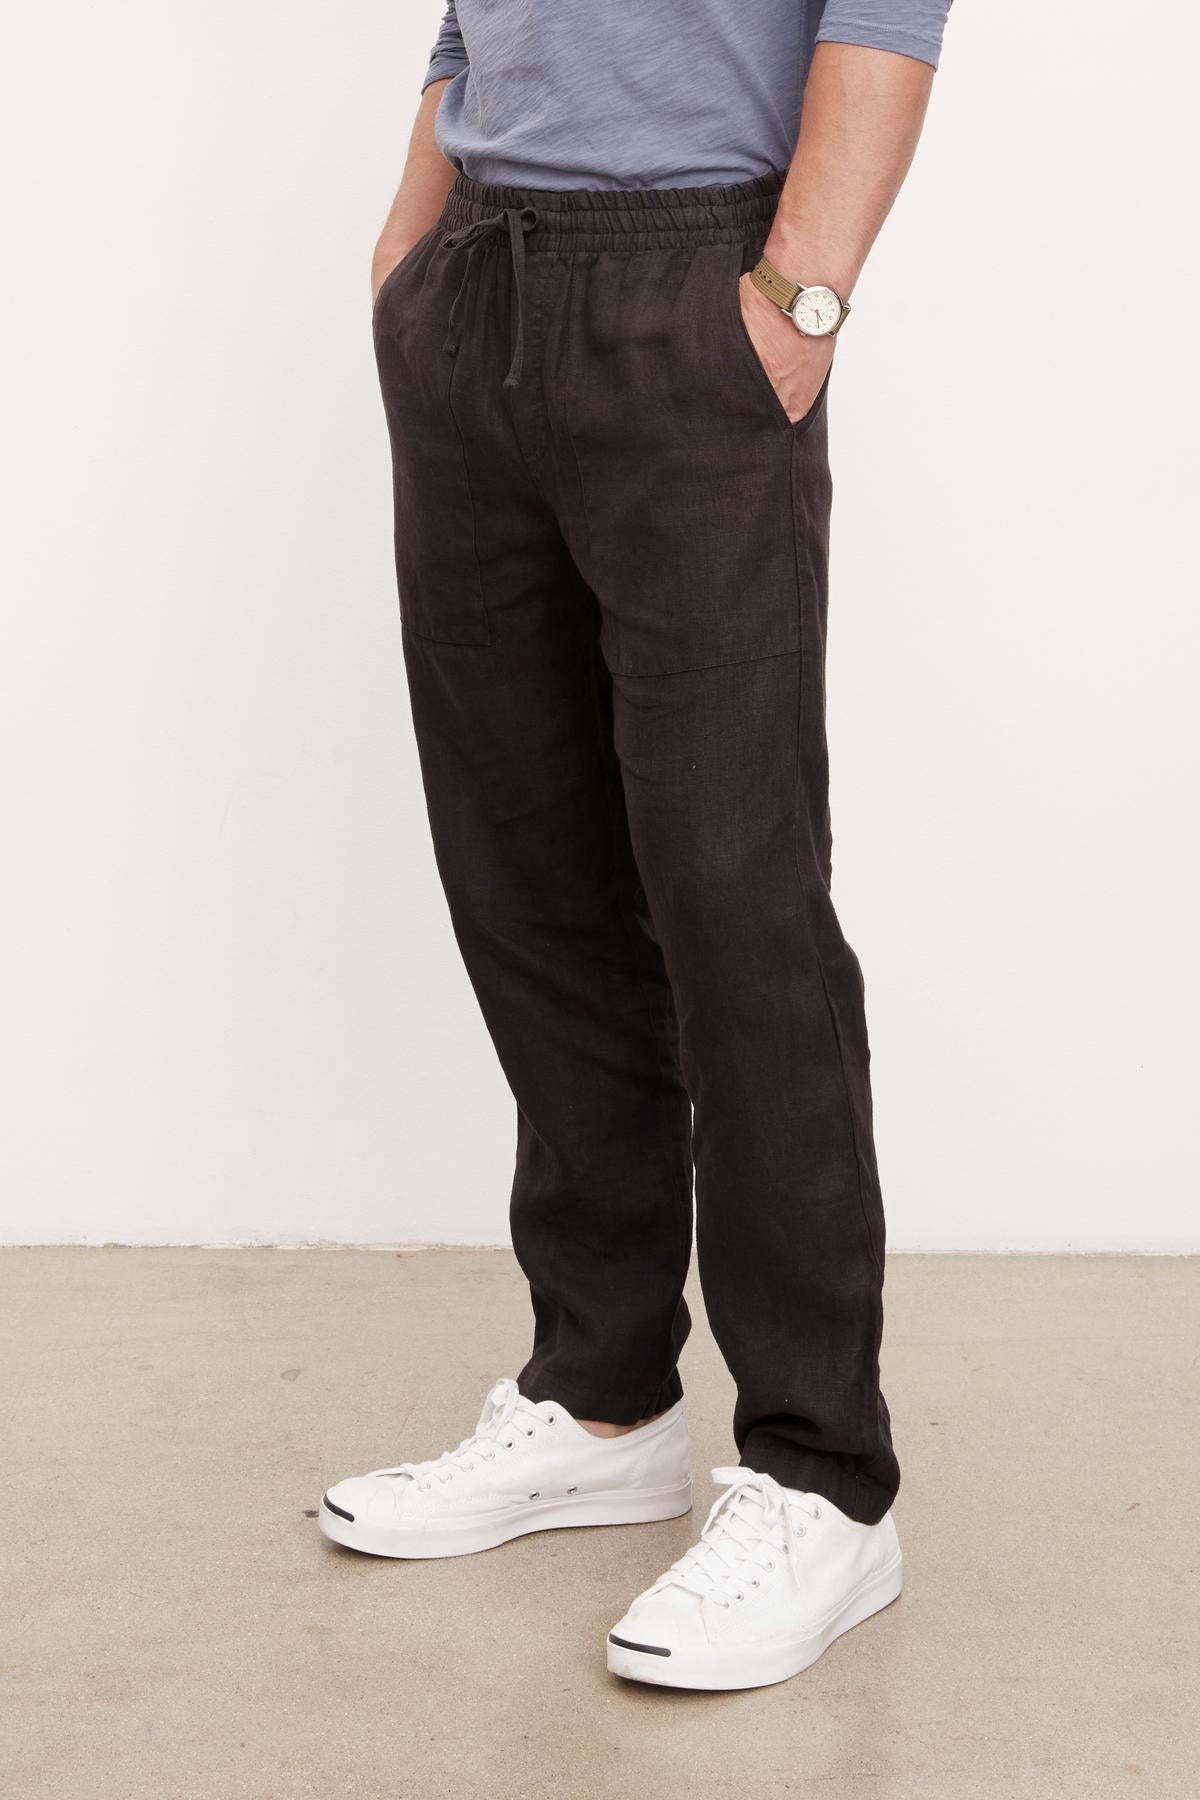   A person wearing Velvet by Graham & Spencer black Phelan linen pants and white shoes. 